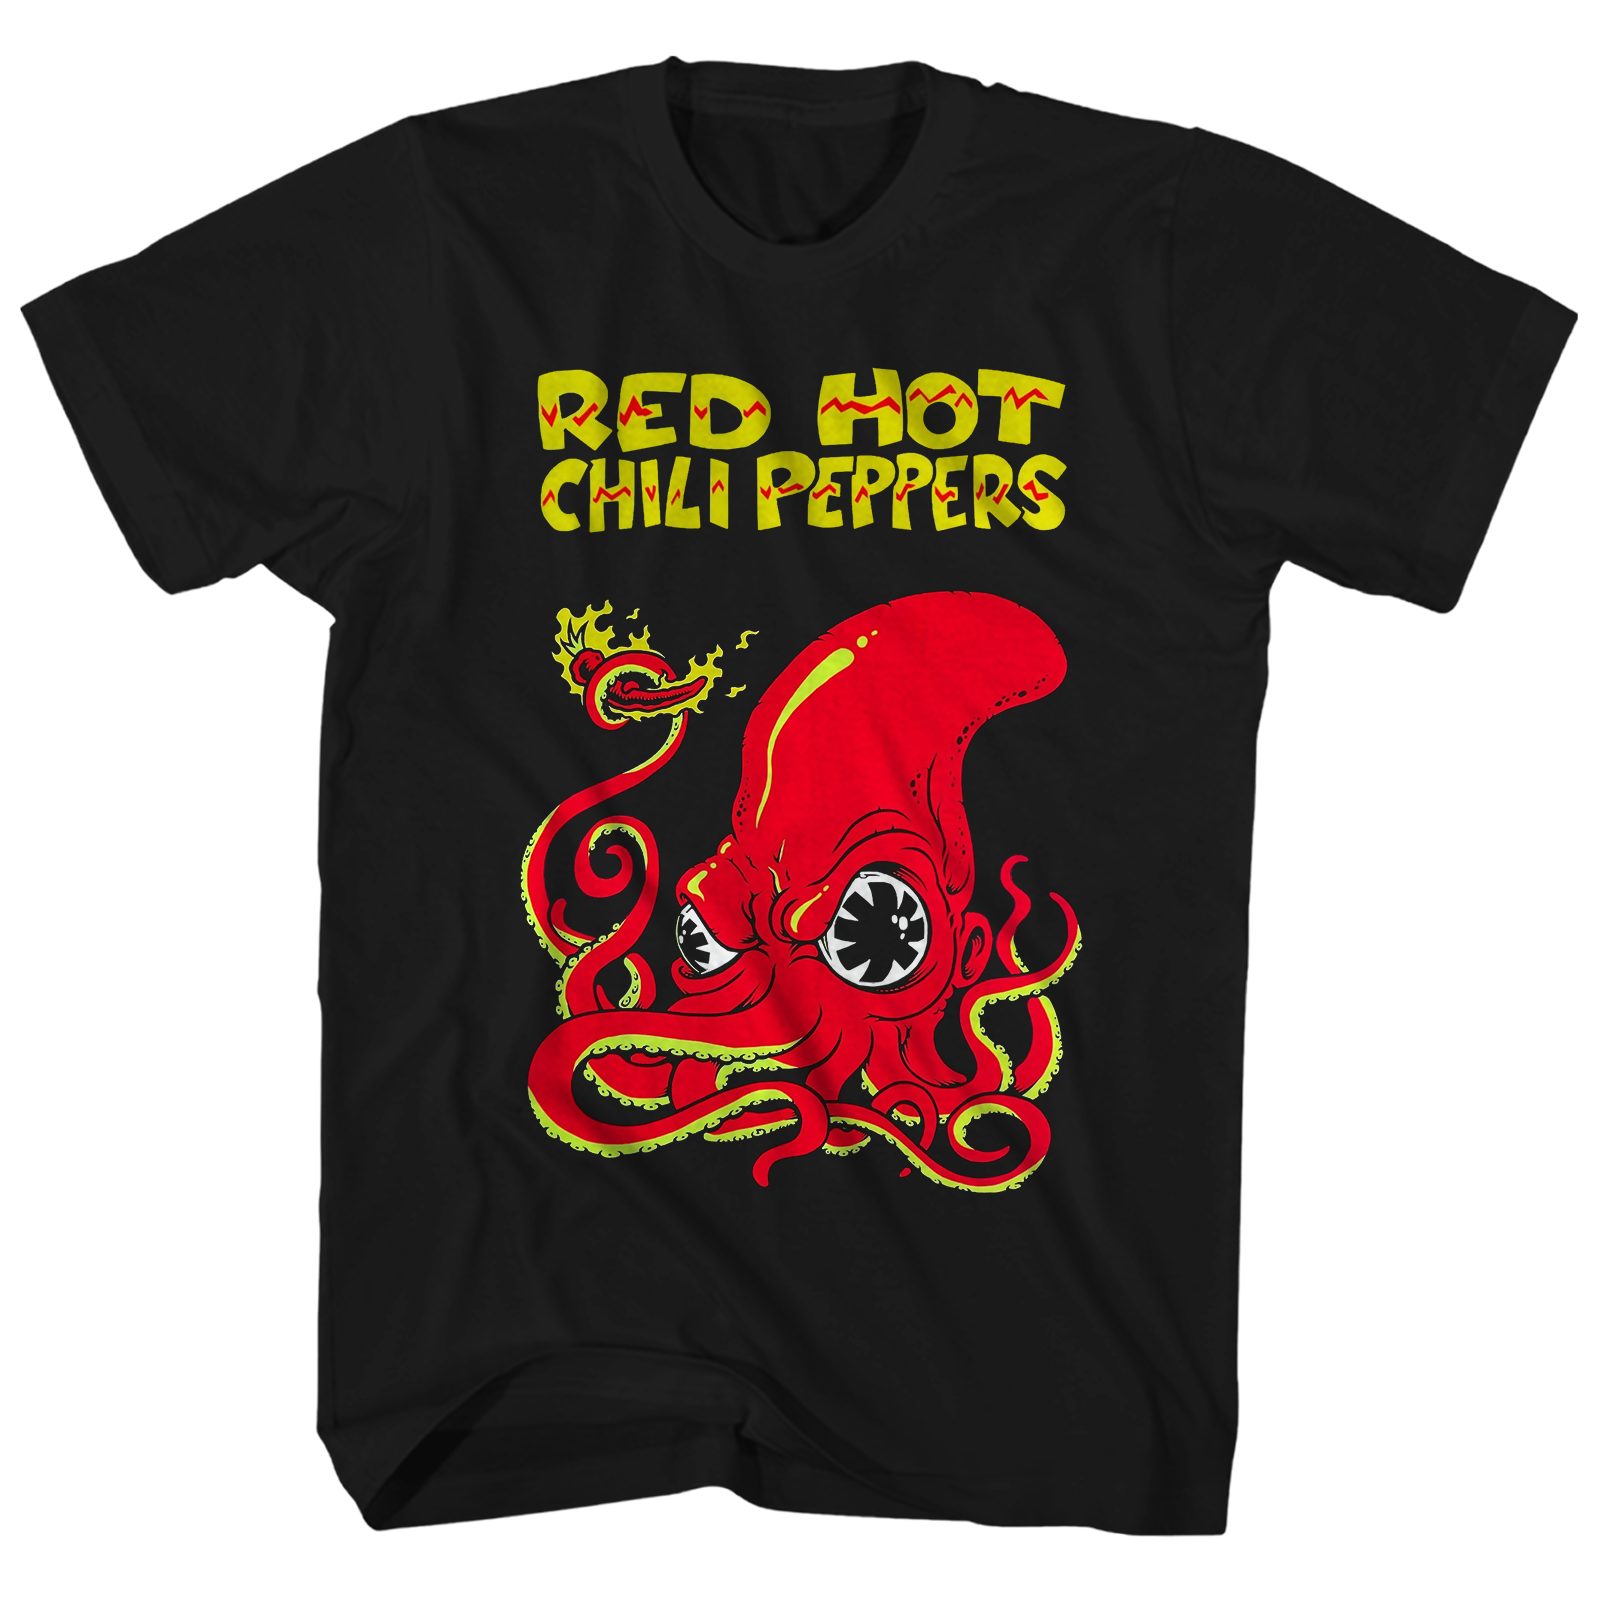 red hot chili peppers shirt